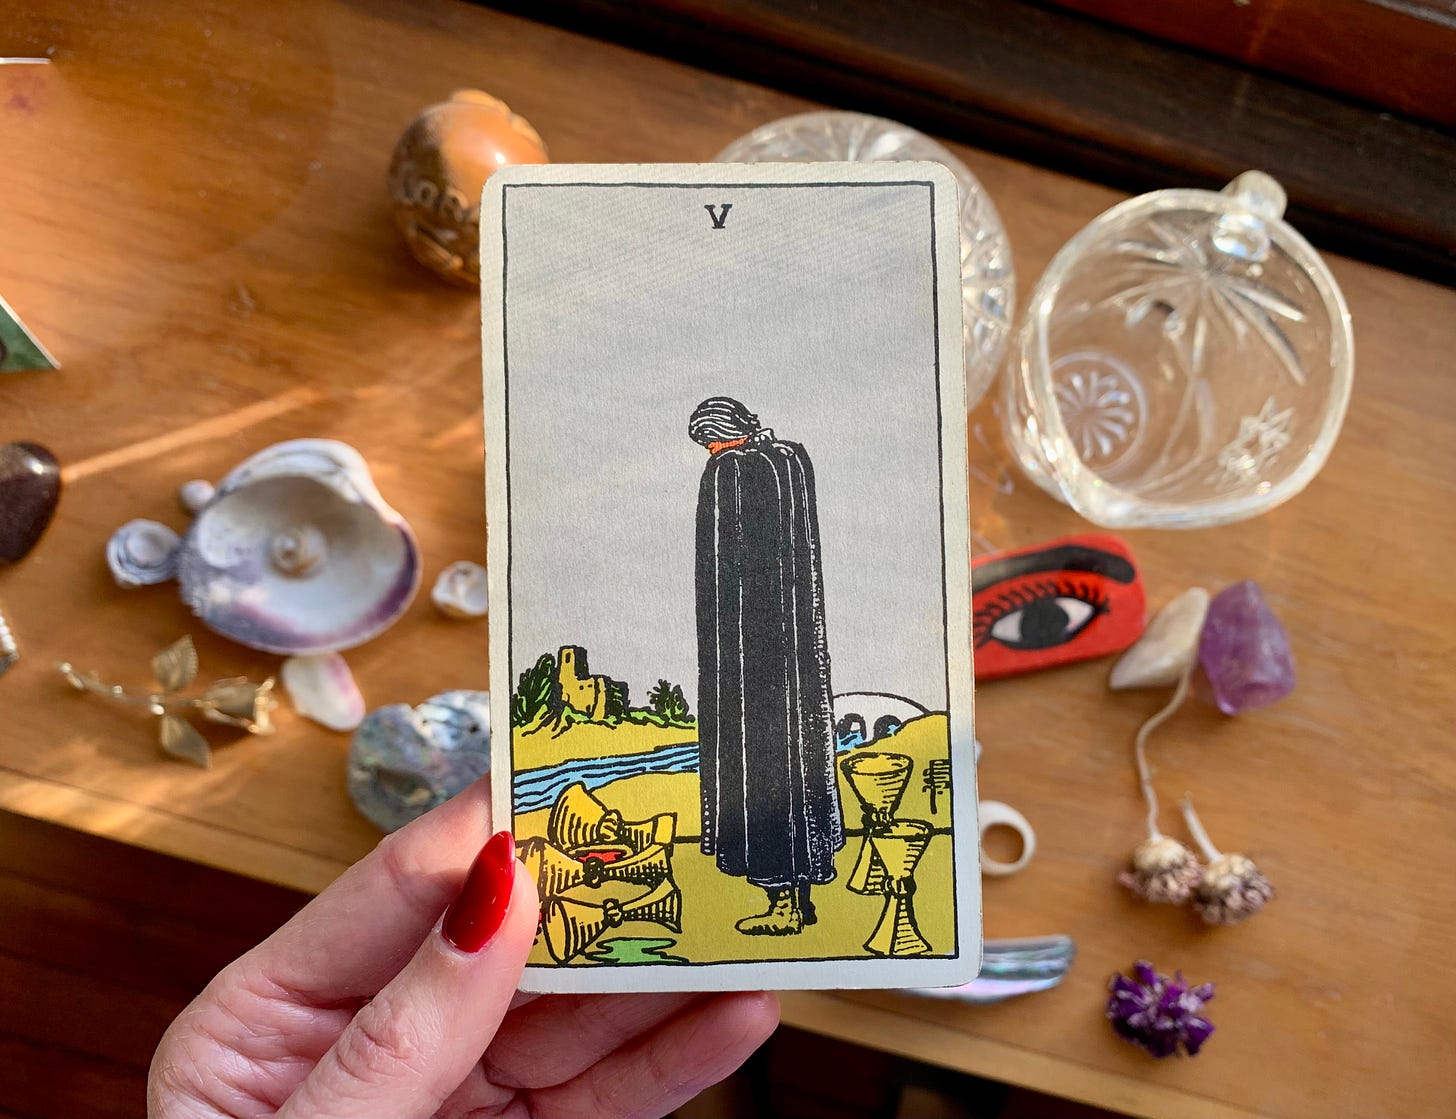 A hand is holding a Tarot card in front of a shelf with a bunch of random objects on it, shells, talismans, glass objects and dust. The card is Five of cups by Pamela Colman Smith for the Rider-Waite-Smith Tarot. In the image a person is dressed all in black, looking down at three spilled cups with two cups standing upright behind them. There is a castle in the distance across a river with a white bridge going over it.